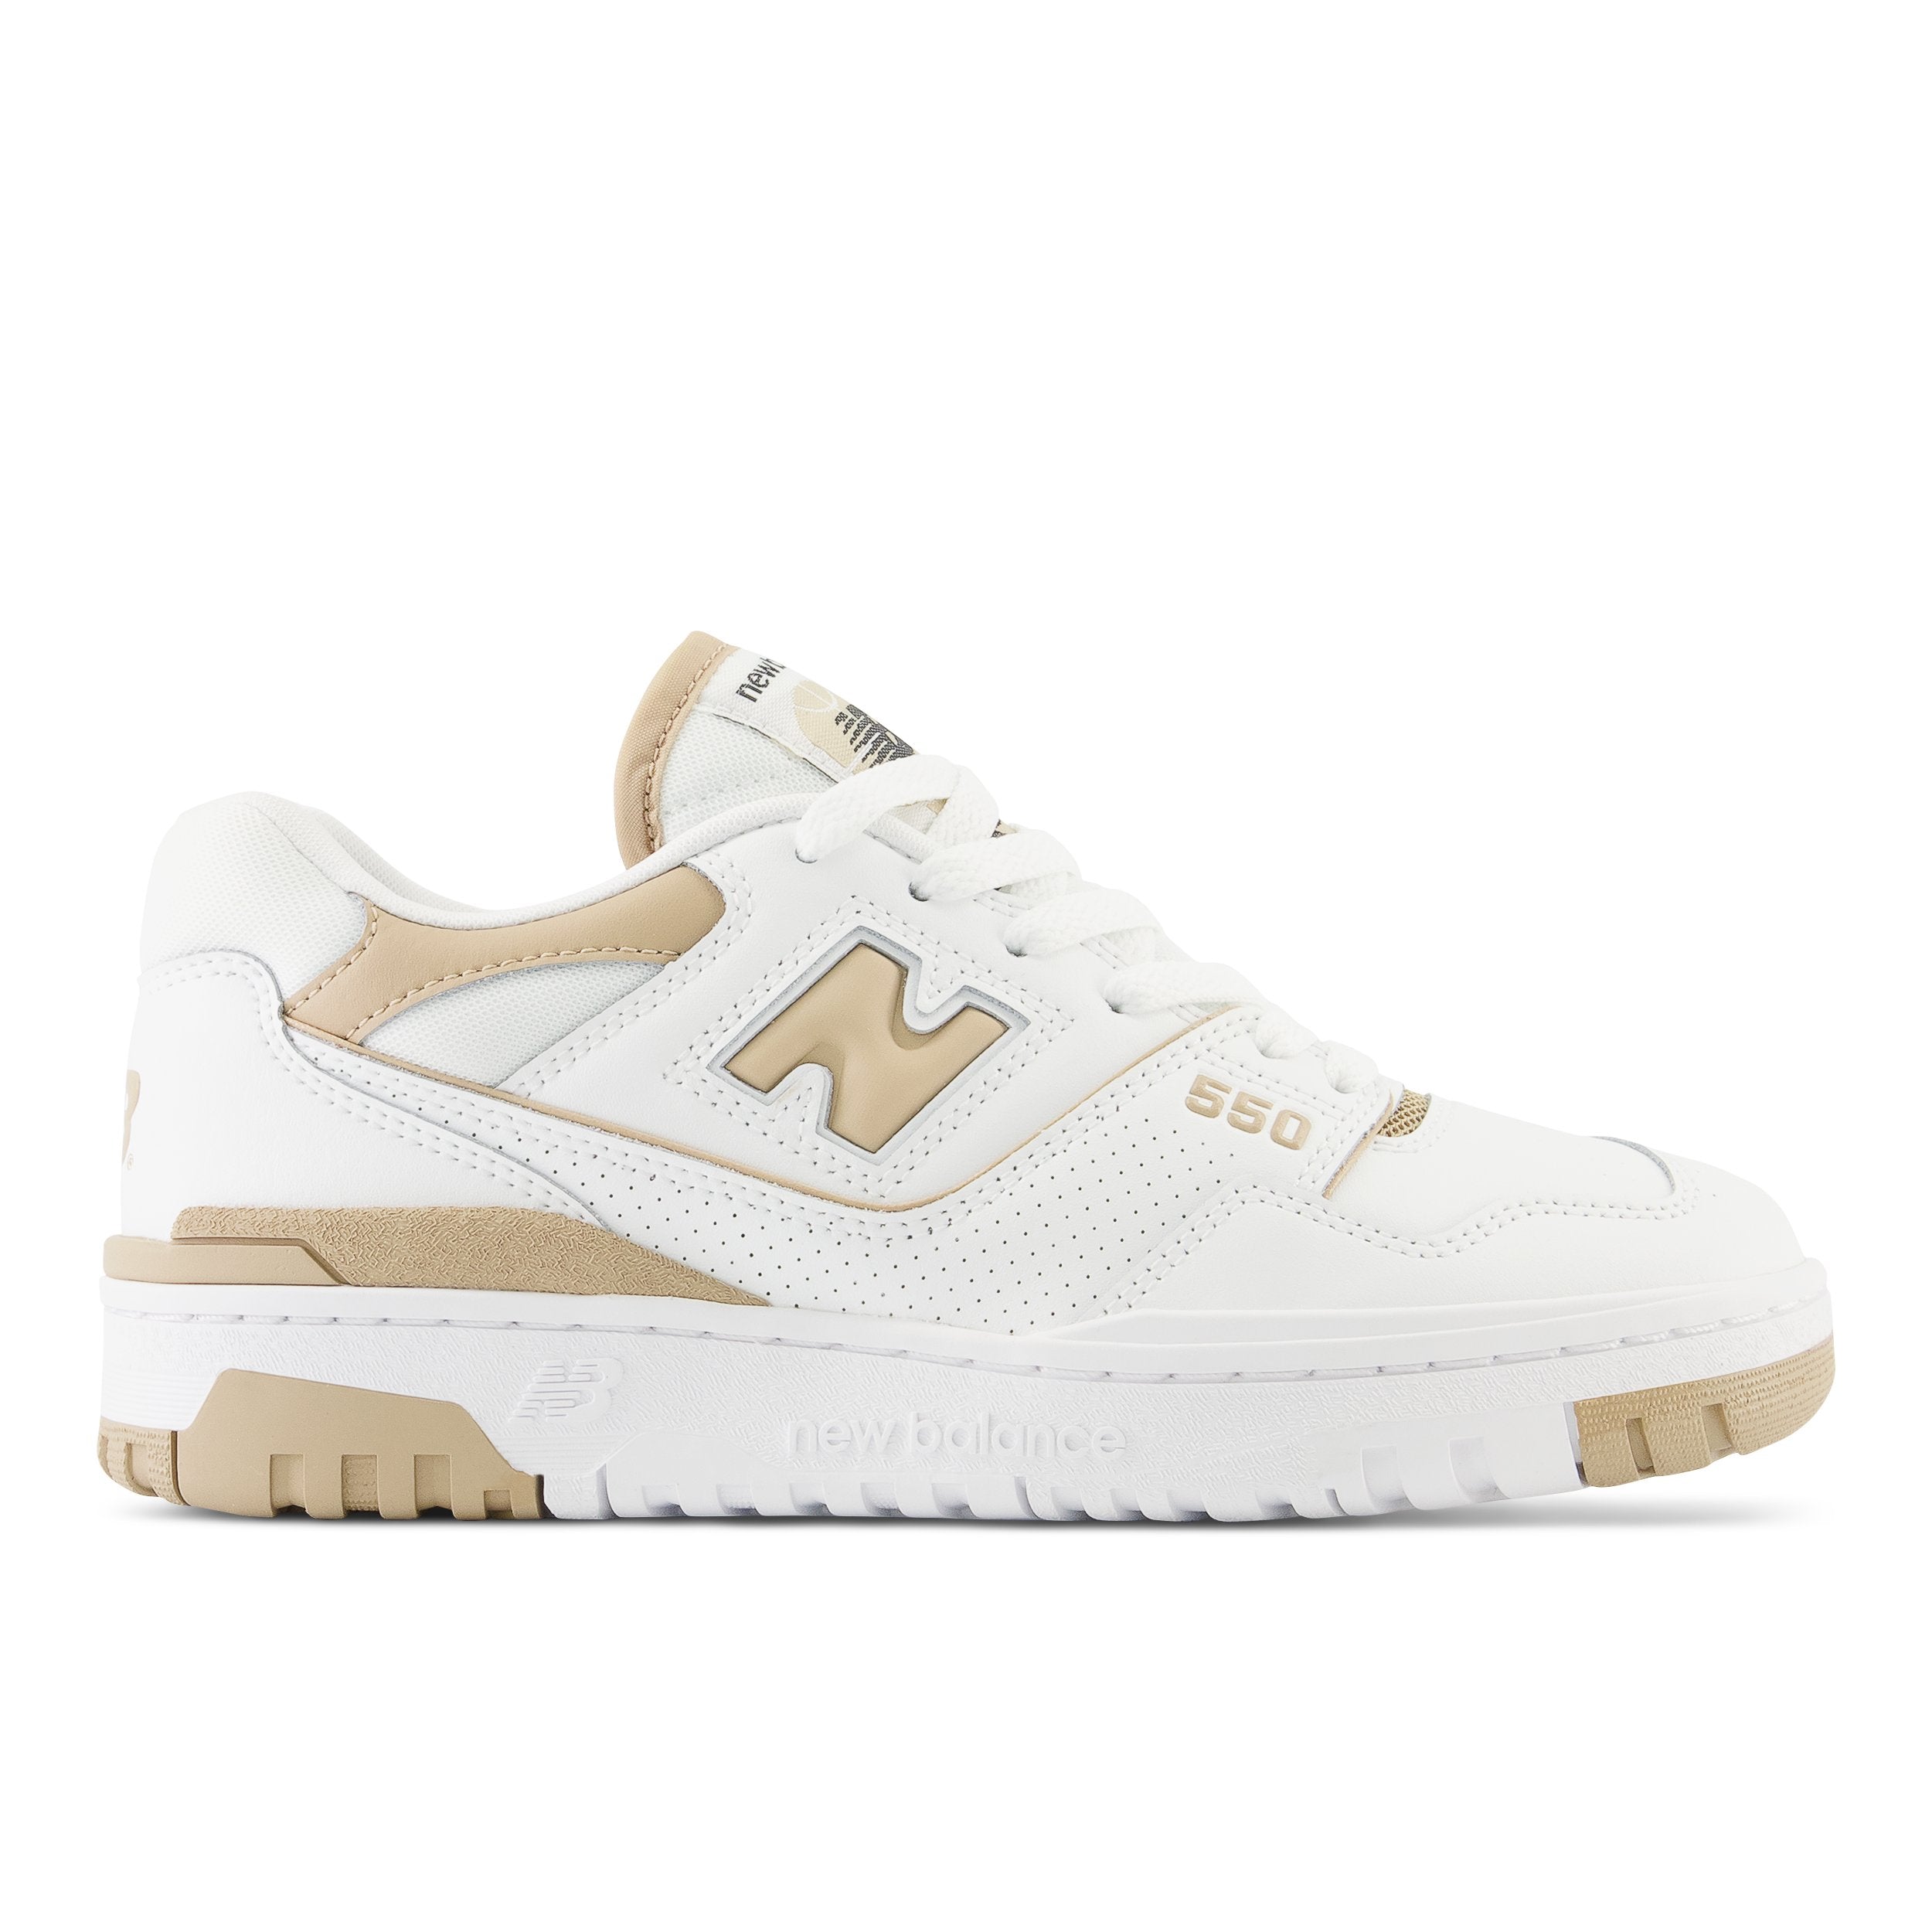 NEW BALANCE-Sneakers Donna 550-White/Incense